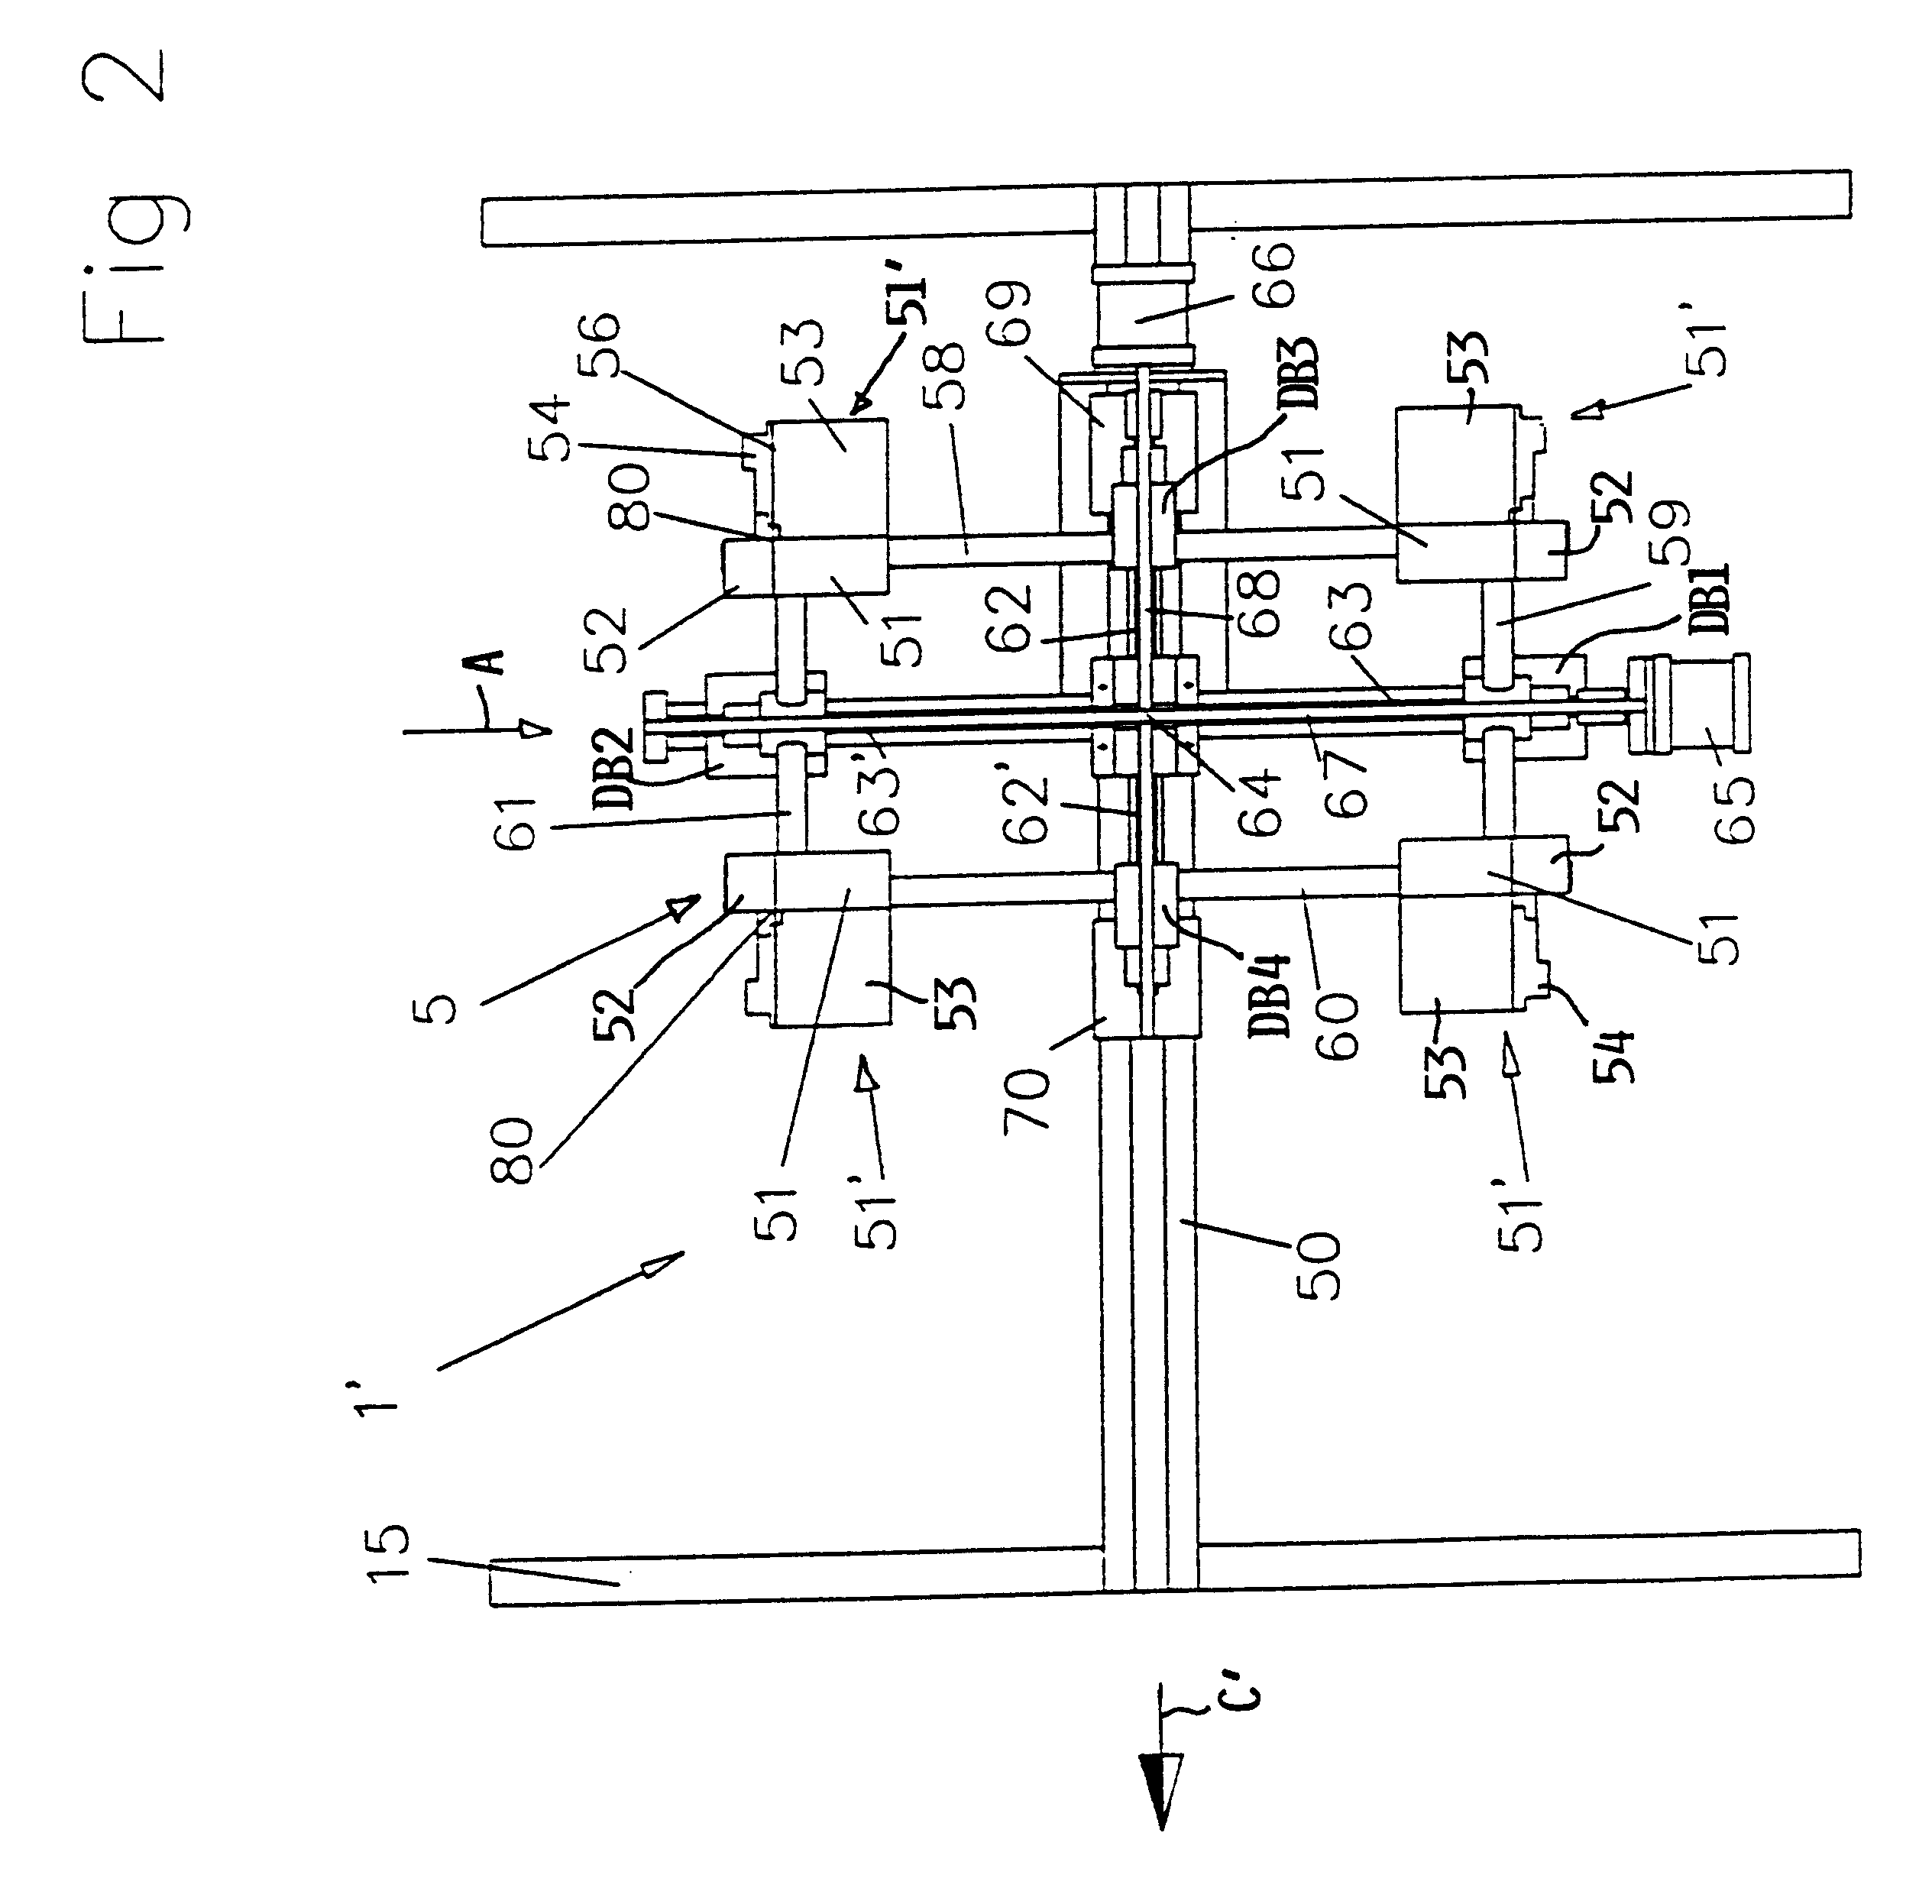 Apparatus for forming cartons from blanks and for simultaneously filling the cartons